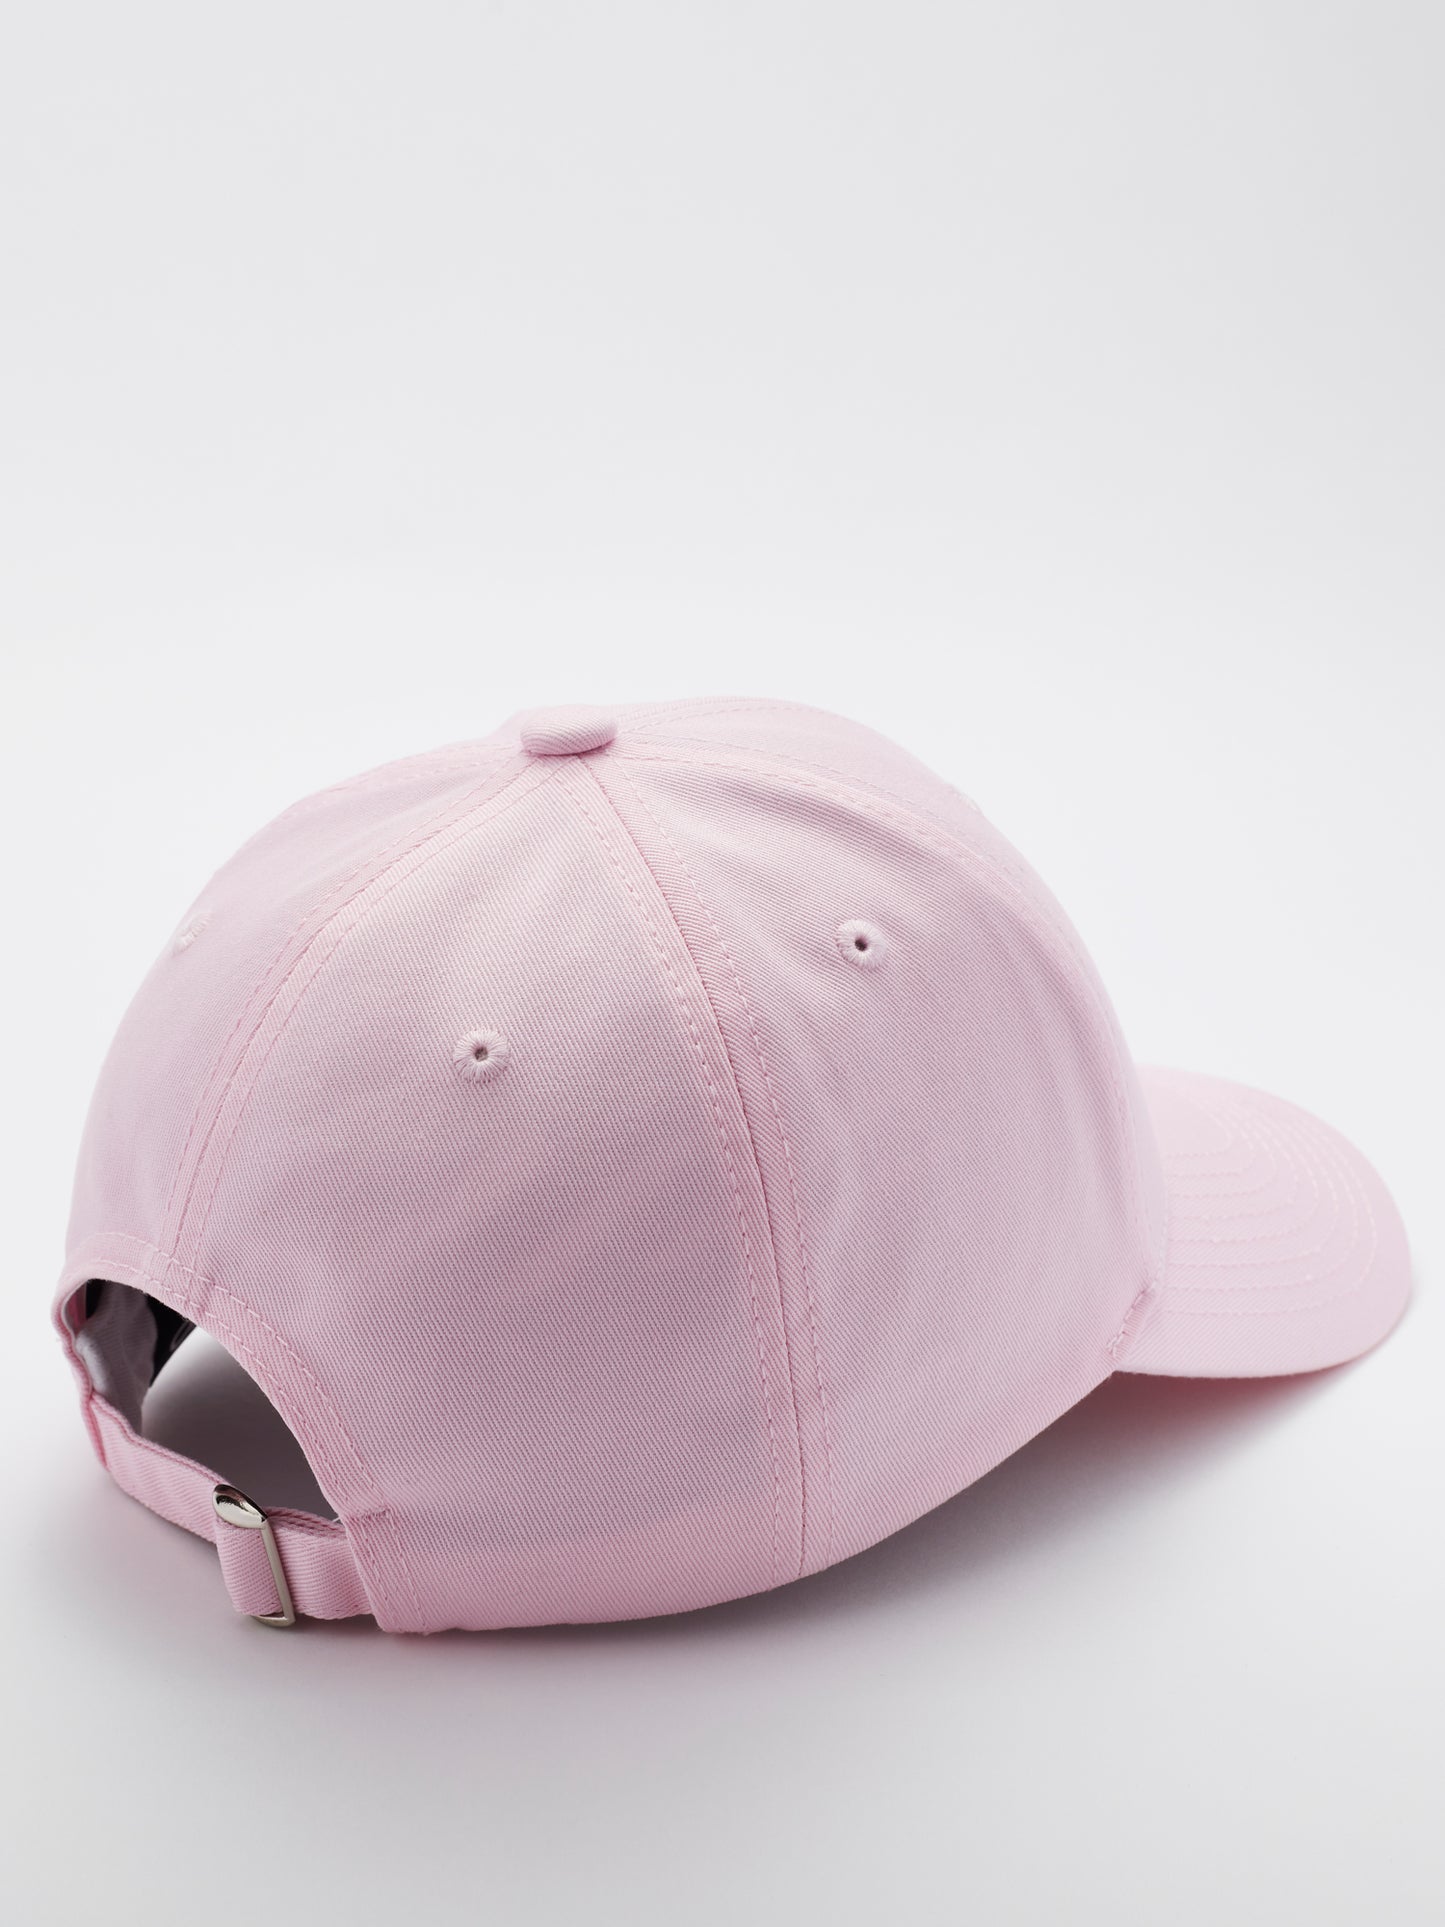 MOOD Brand - Flying Ghost baseball cap in pink color - back view